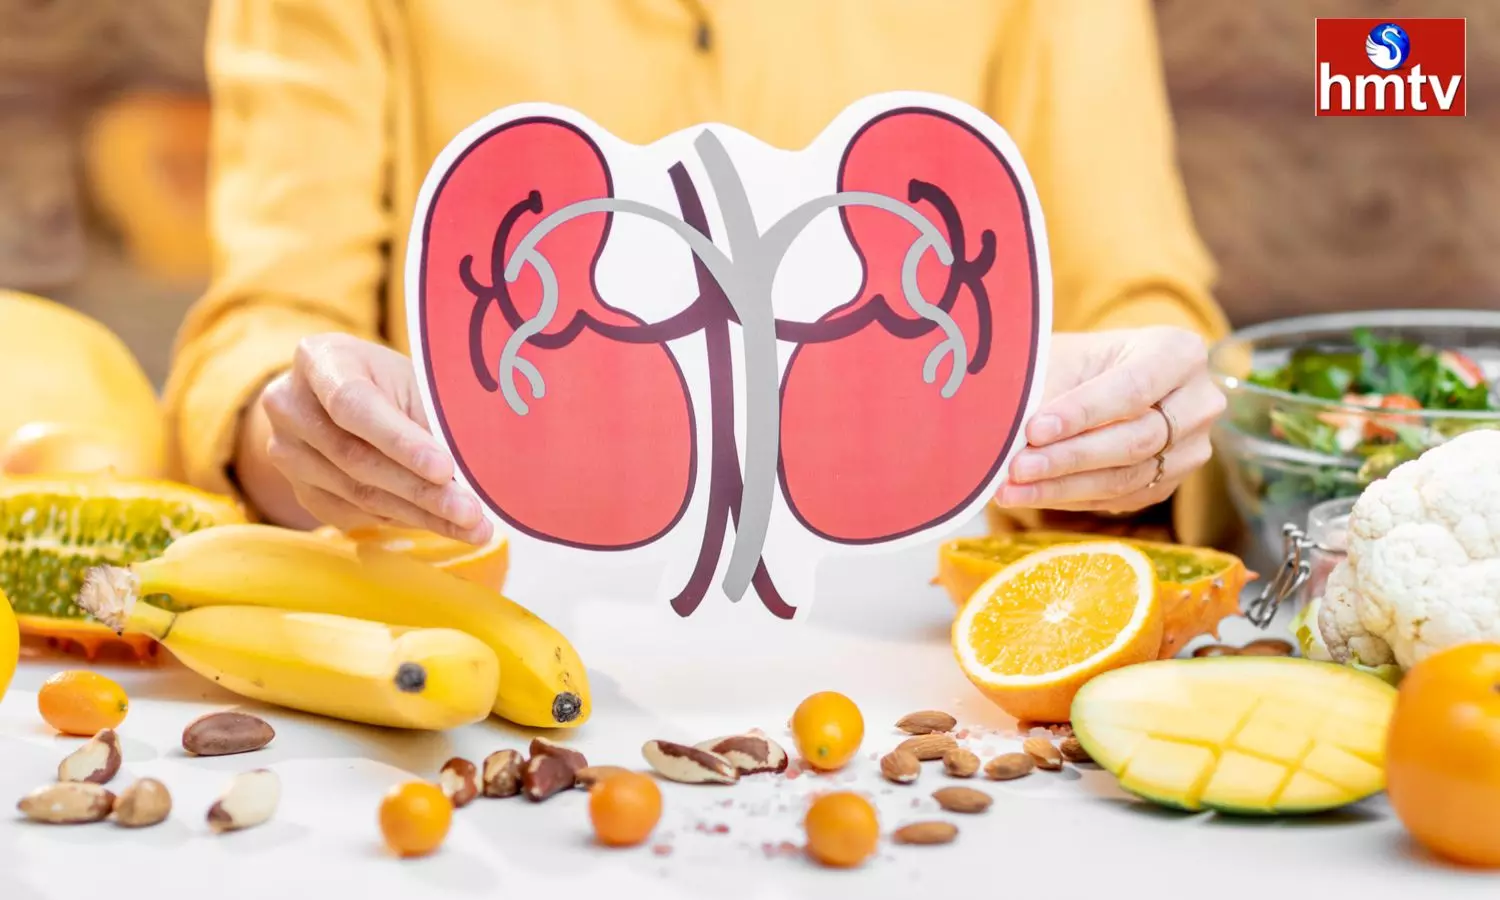 Kidney Stone Patients should not eat these ingredients by mistake the problem will become more Troublesome